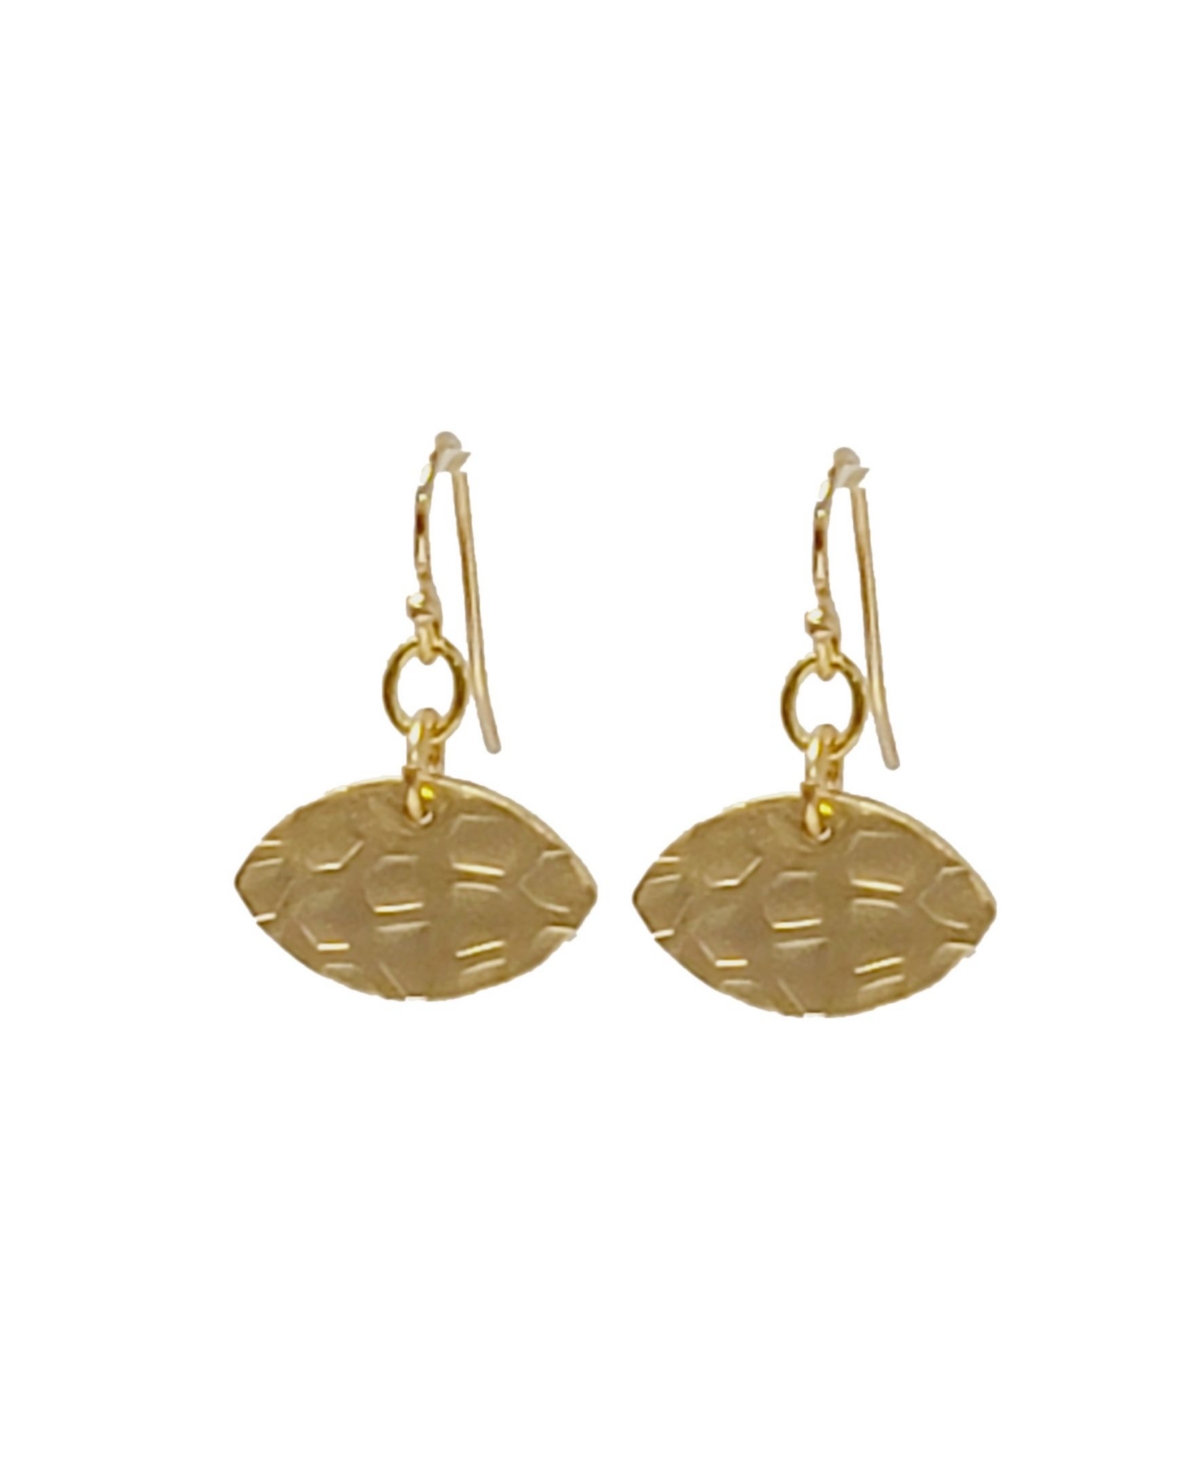 Minu Jewels Women's Ain Earrings with Gold-Tone Accents